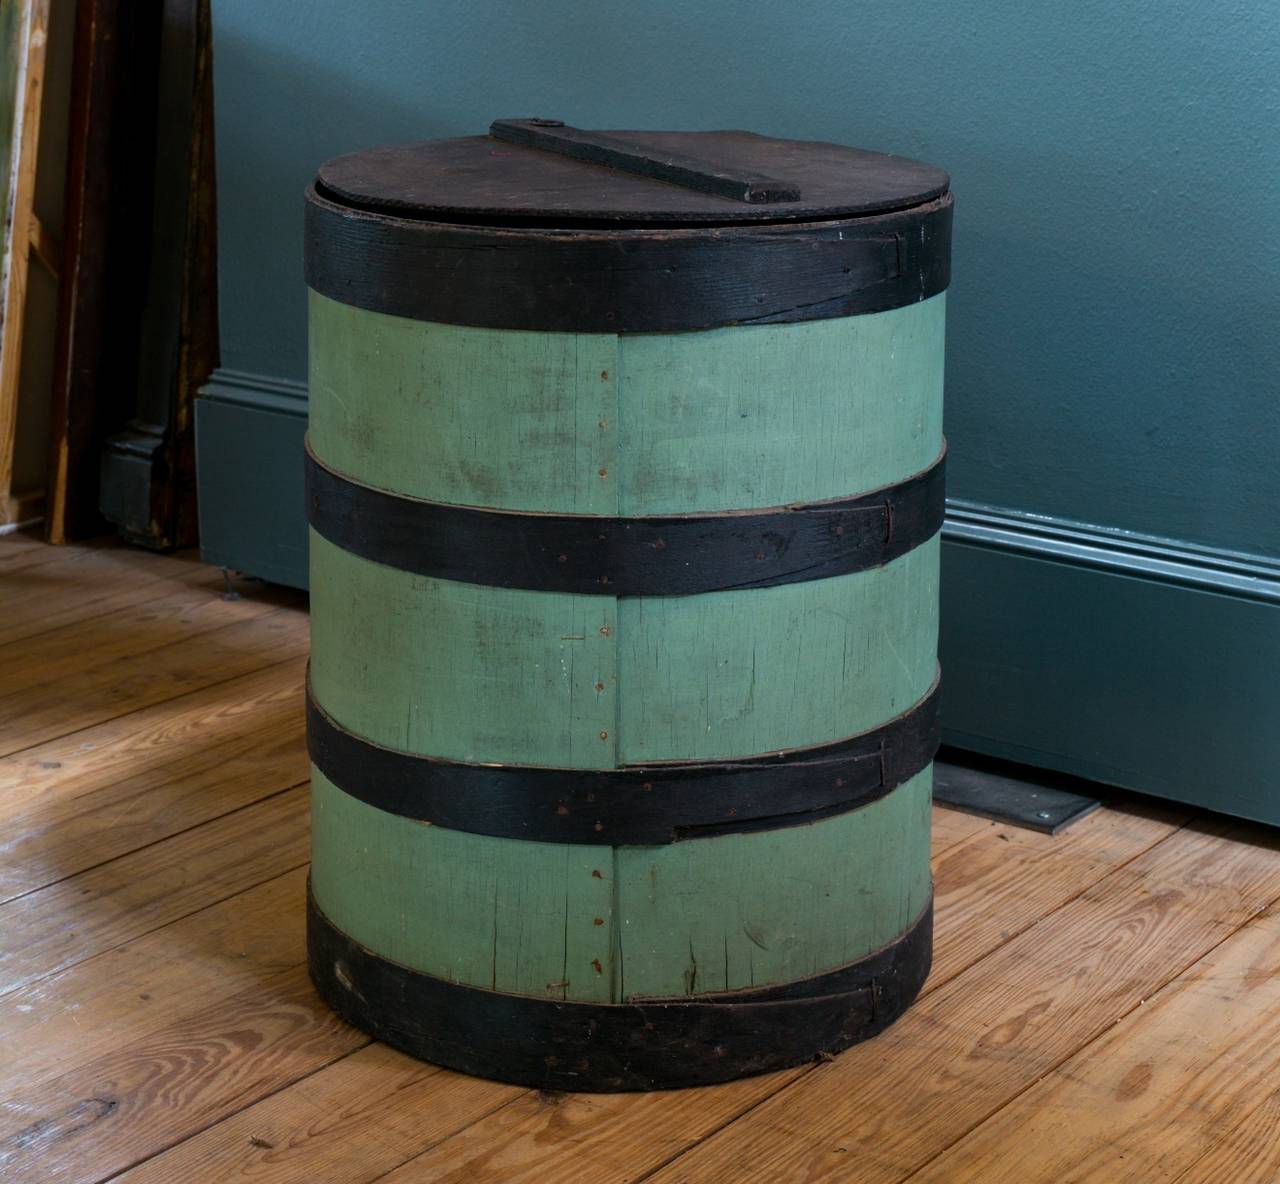 Handmade, hand-painted wooden barrel from France, circa 1920s. Original paint. The barrel includes its original painted wooden lid. Very sophisticated color palette.